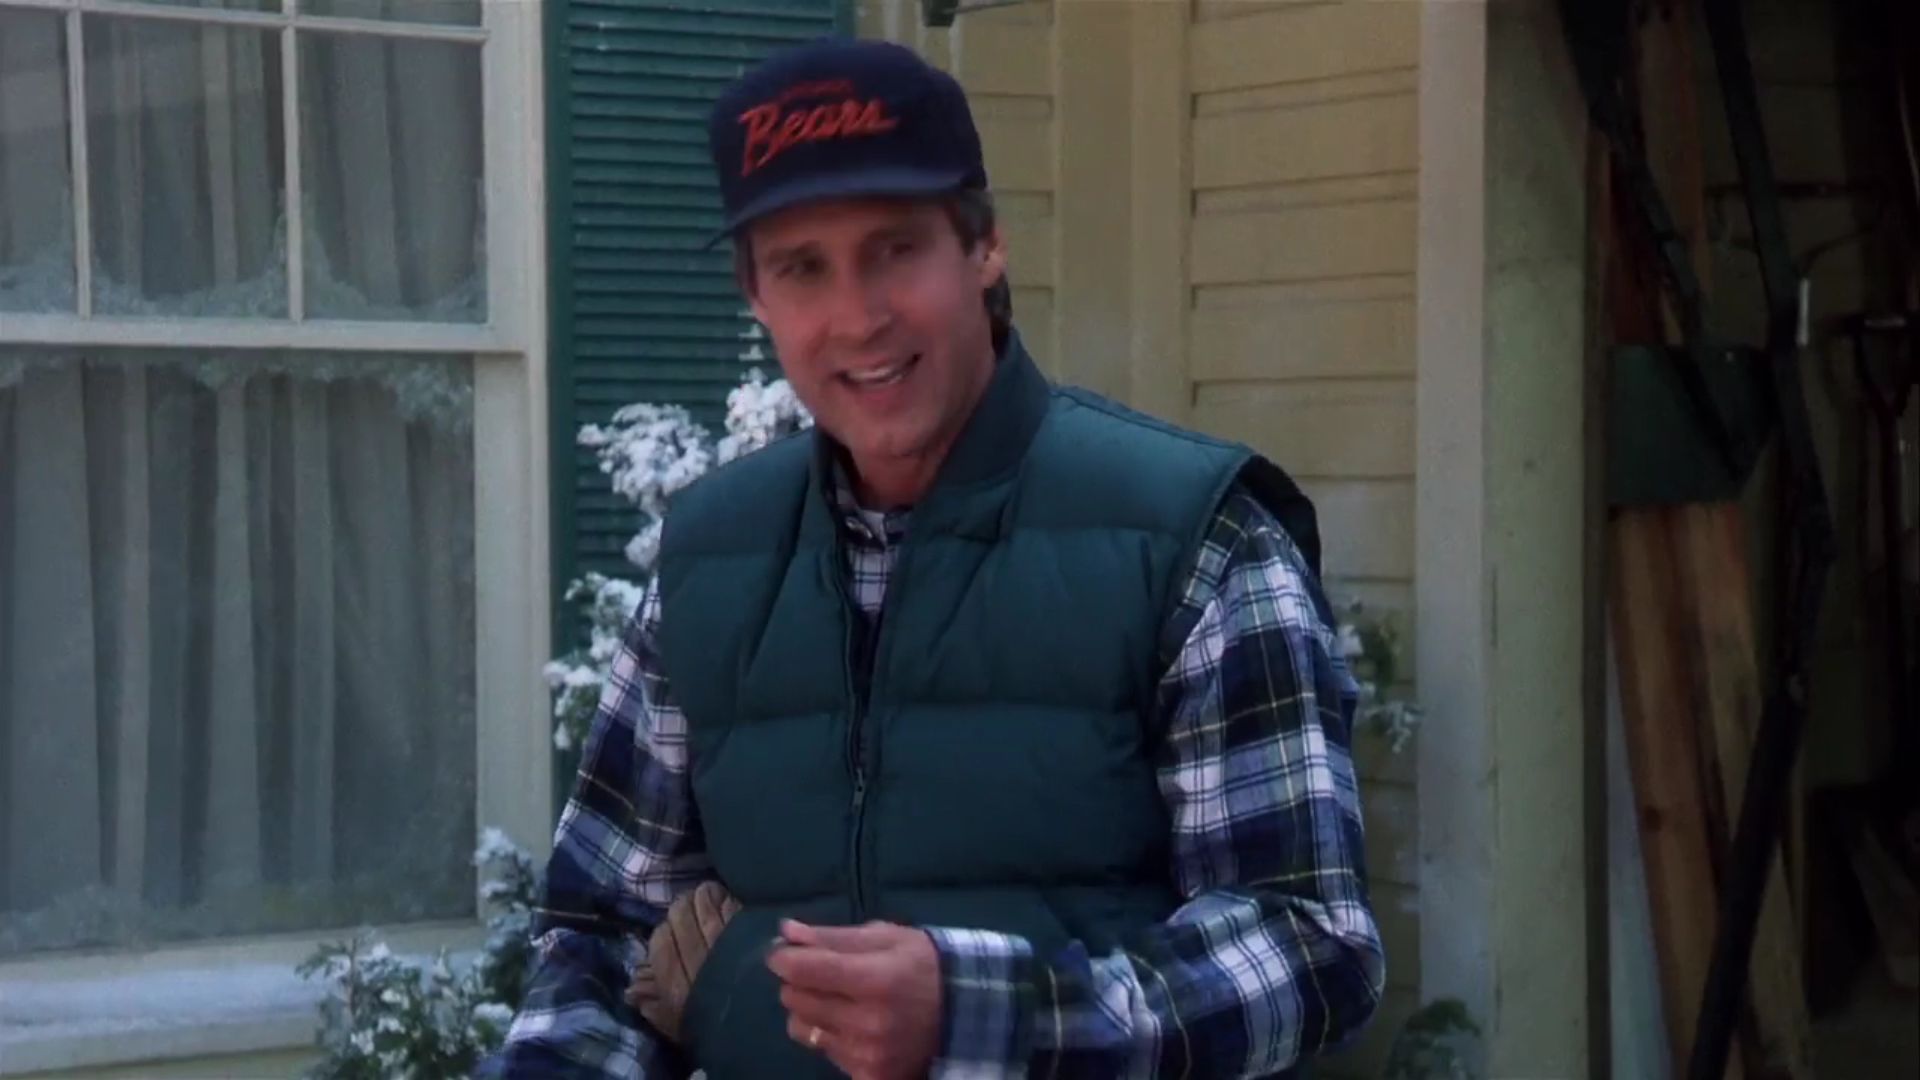 clark griswold outfit